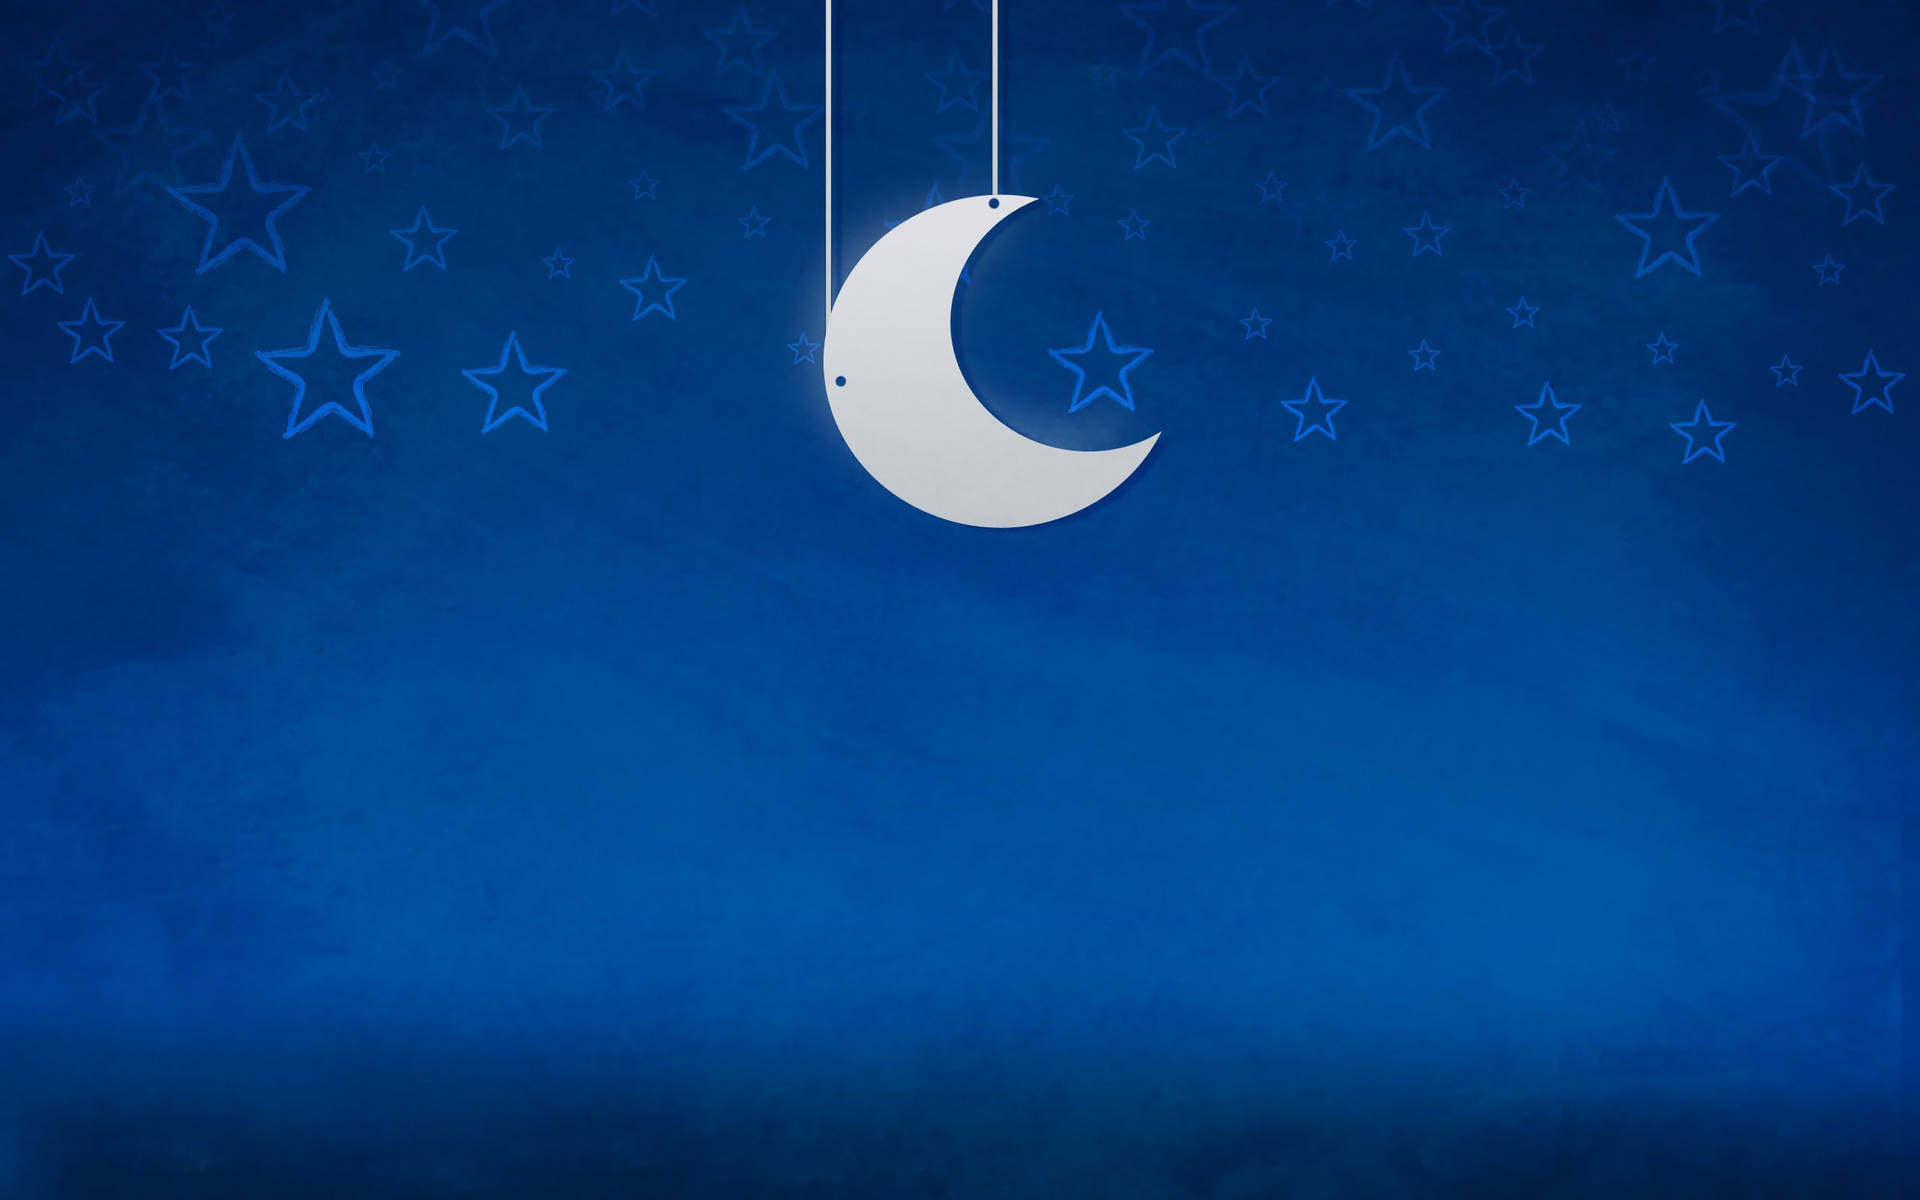 Blue Moon And Stars Wallpaper